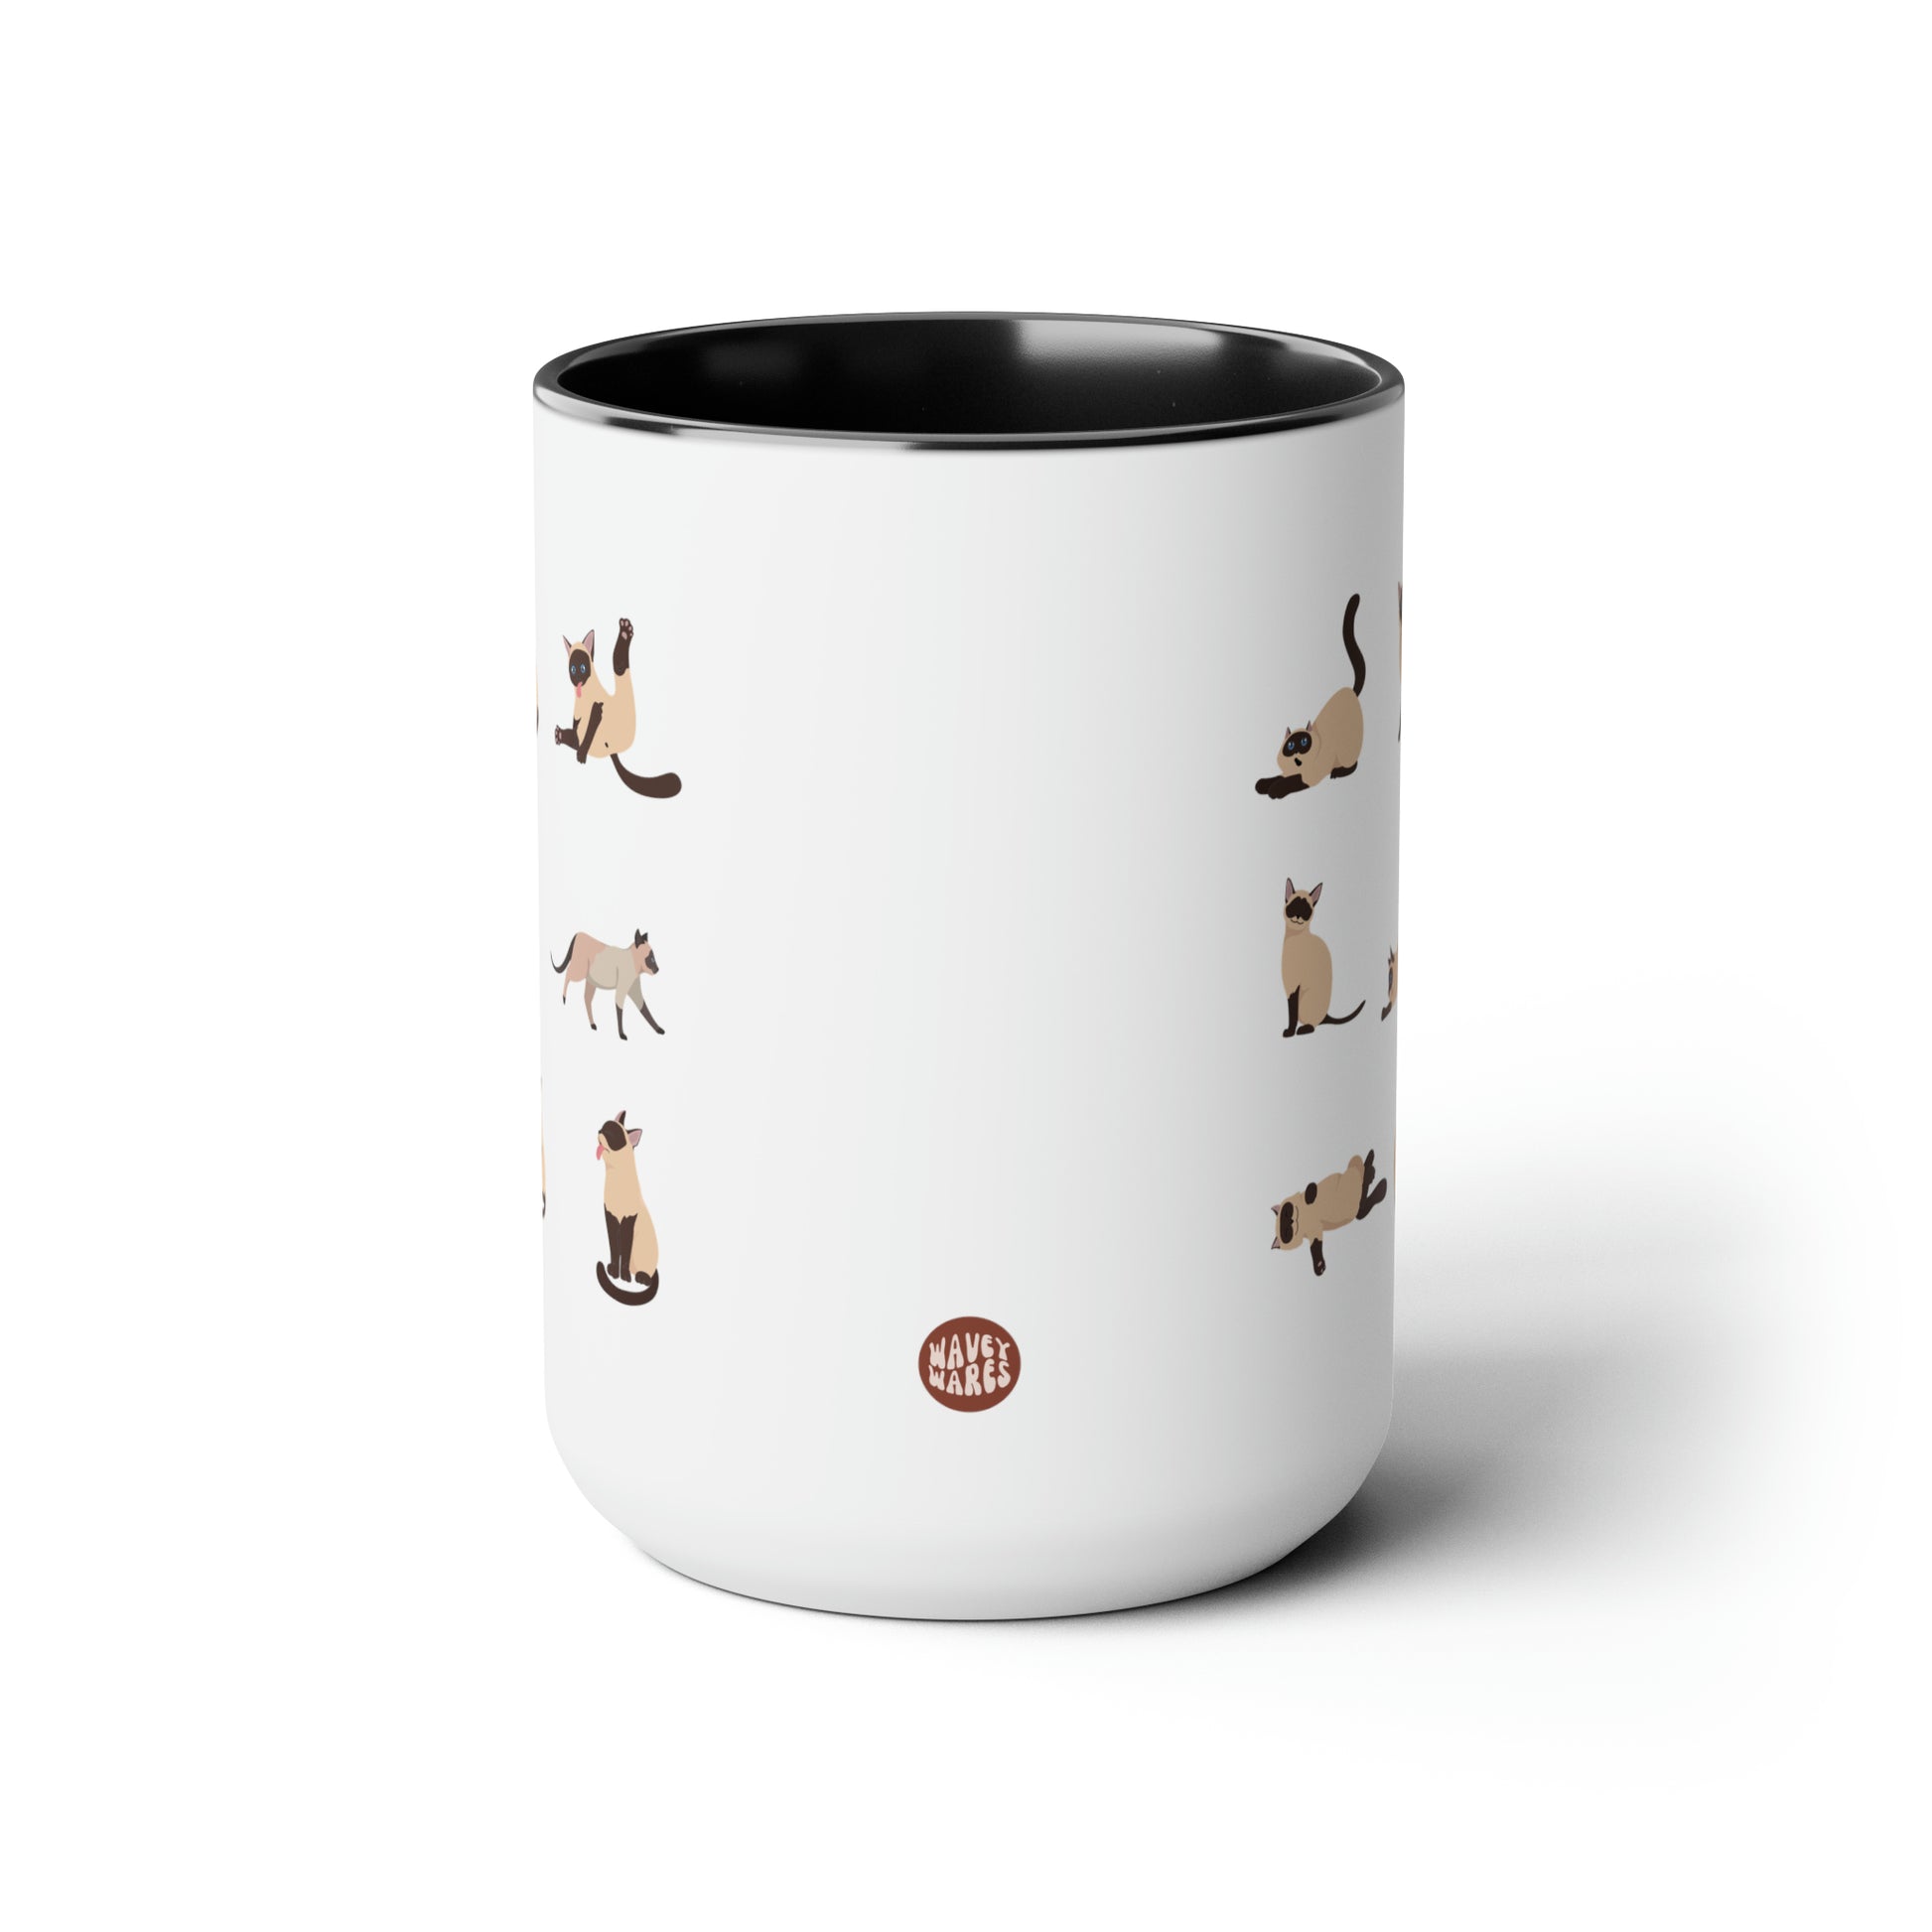 Siamese Cats 15oz white with black accent funny large coffee mug gift for cat mom cute kitten pet lover waveywares wavey wares wavywares wavy wares side